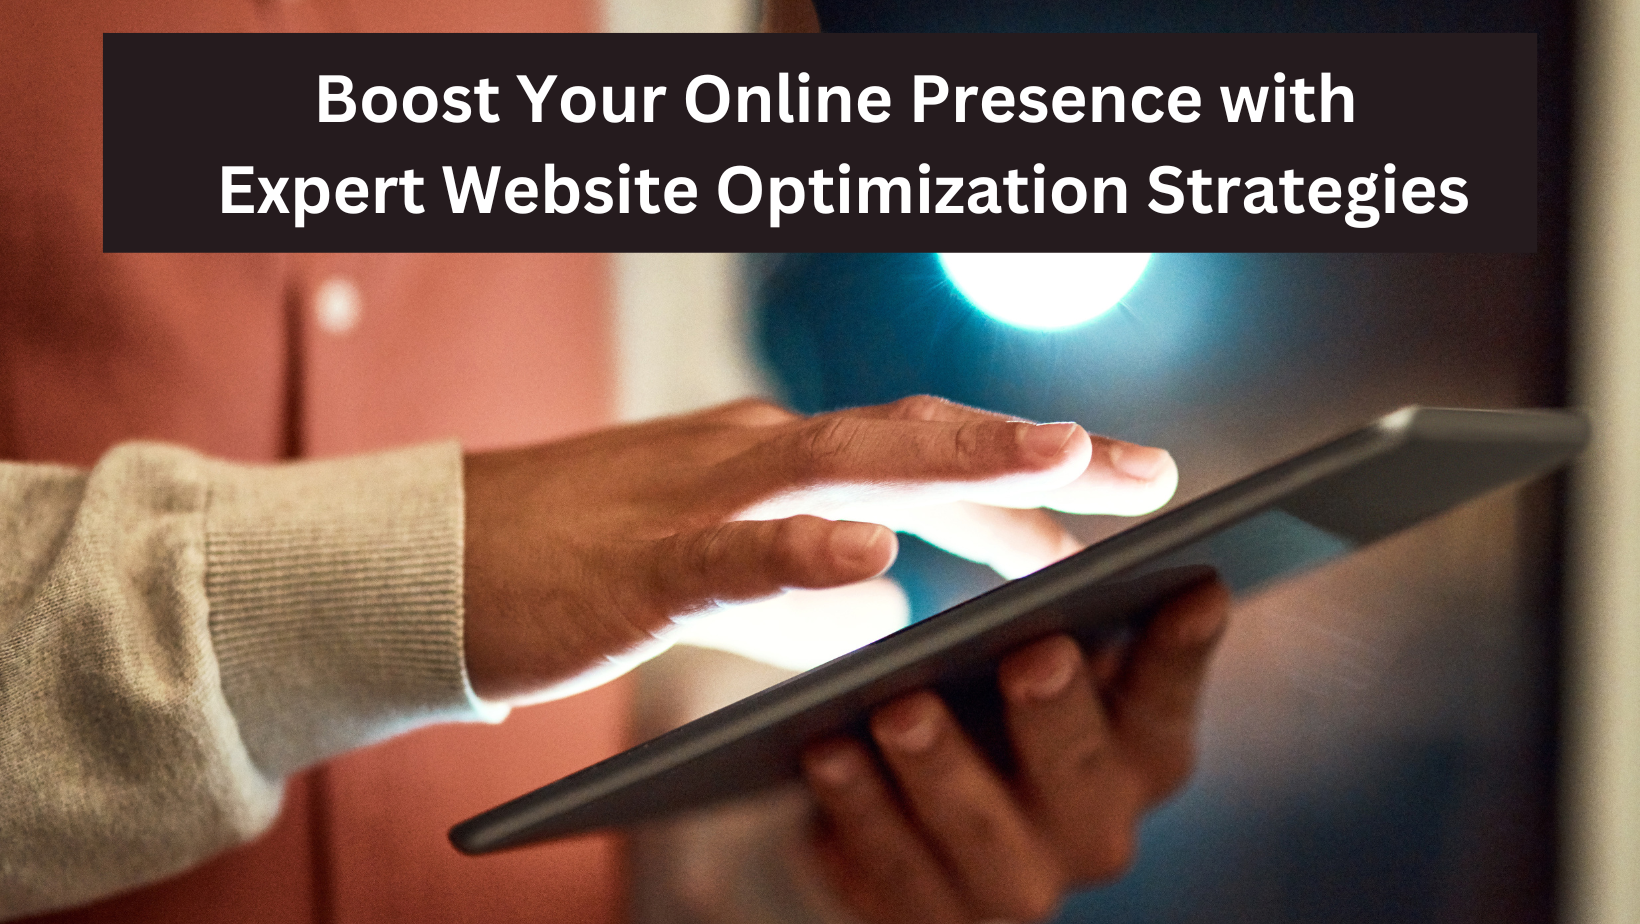 Boost Your Online Presence with Expert Website Optimization Strategies